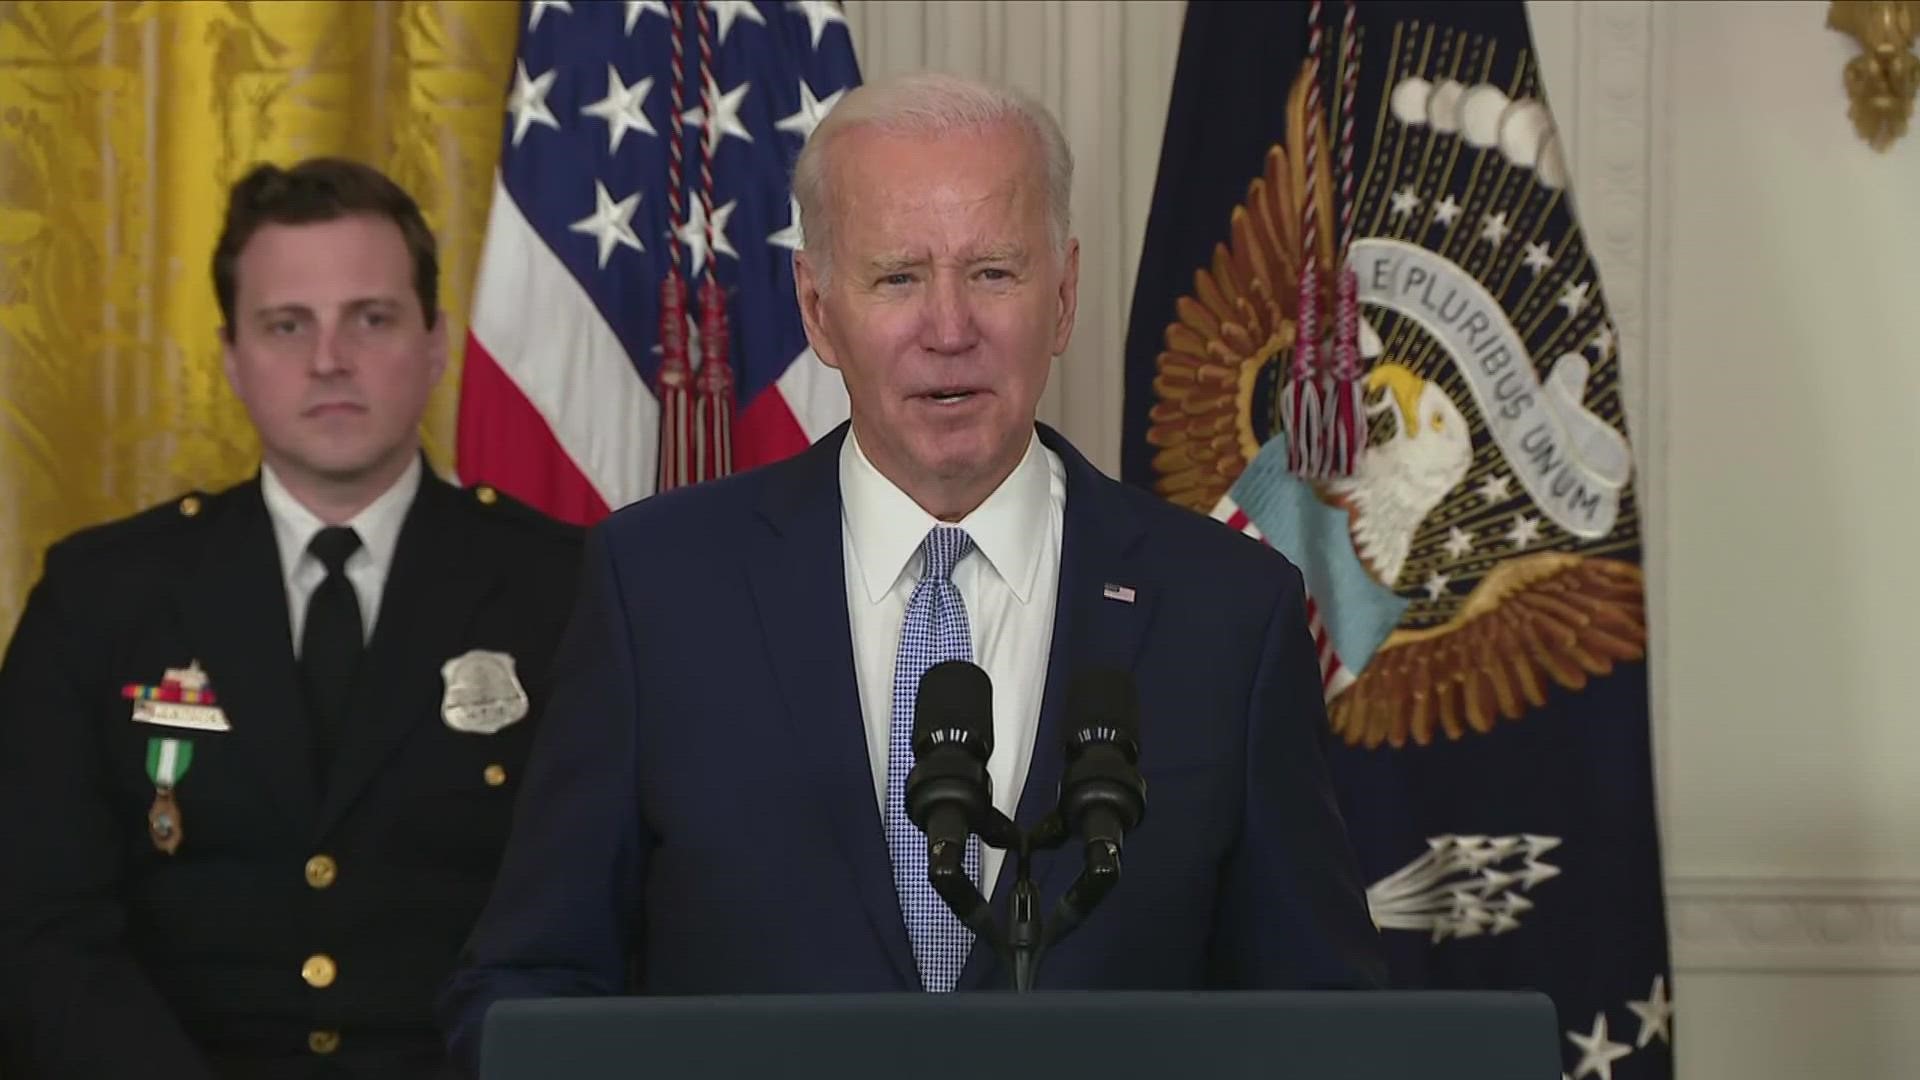 Biden is awarding the Presidential Citizens Medal to officials, election workers and officers who upheld the 2020 election results and fought back the Capitol mob.